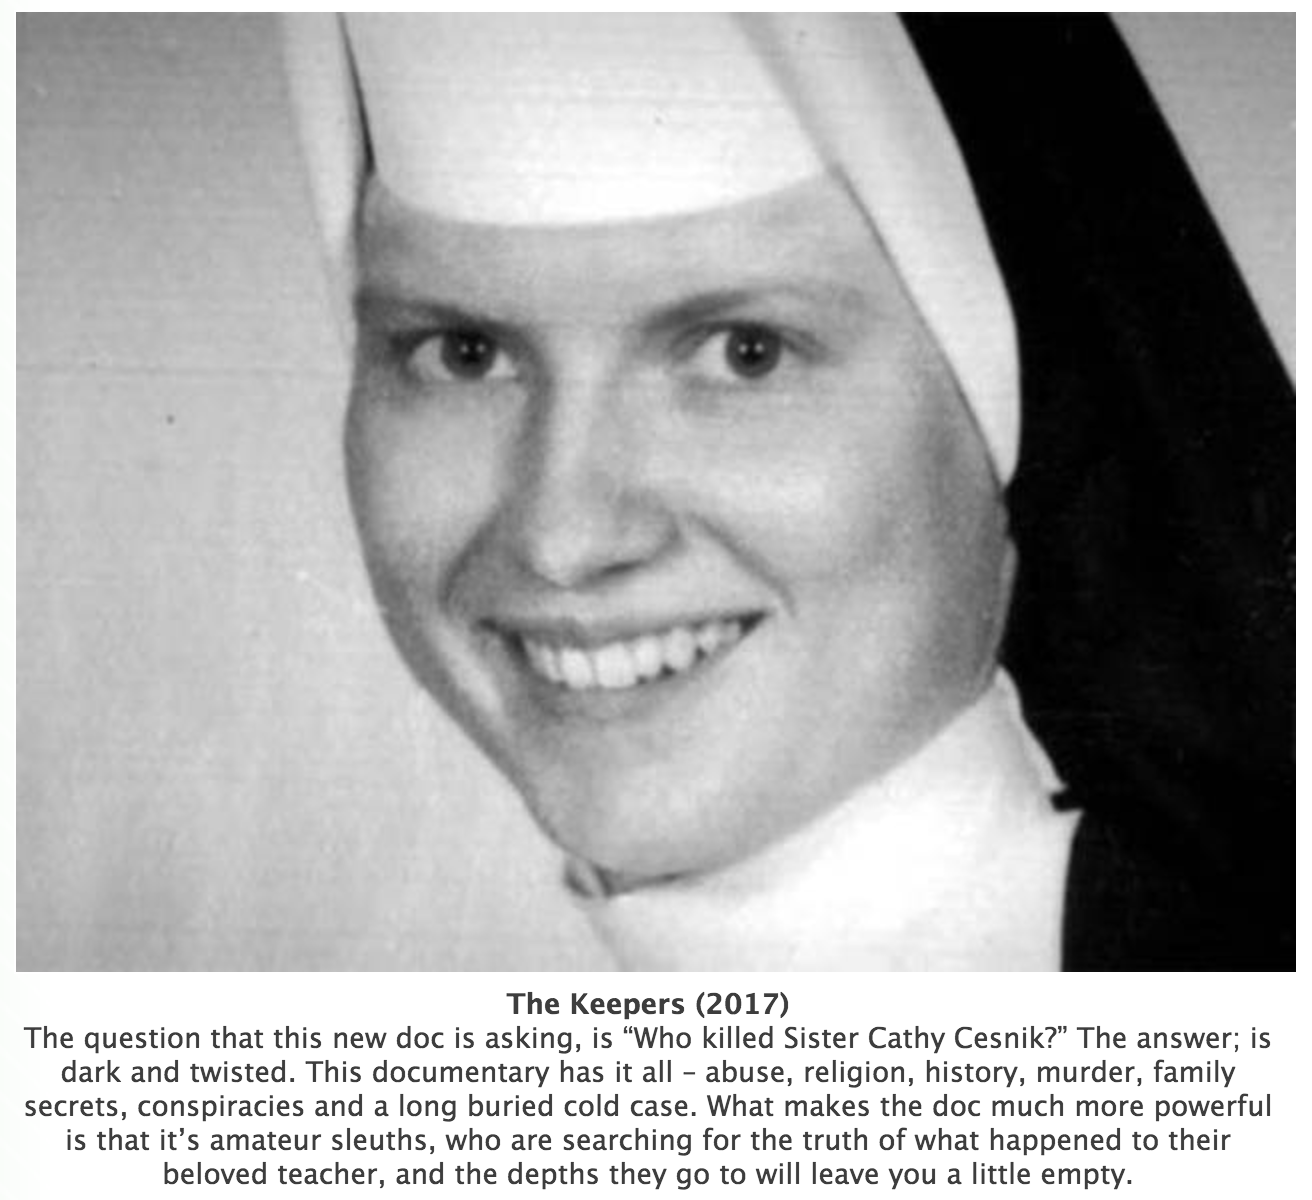 crime netflix documentaries - The Keepers 2017 The question that this new doc is asking, is "Who killed Sister Cathy Cesnik?" The answer; is dark and twisted. This documentary has it all abuse, religion, history, murder, family secrets, conspiracies and a